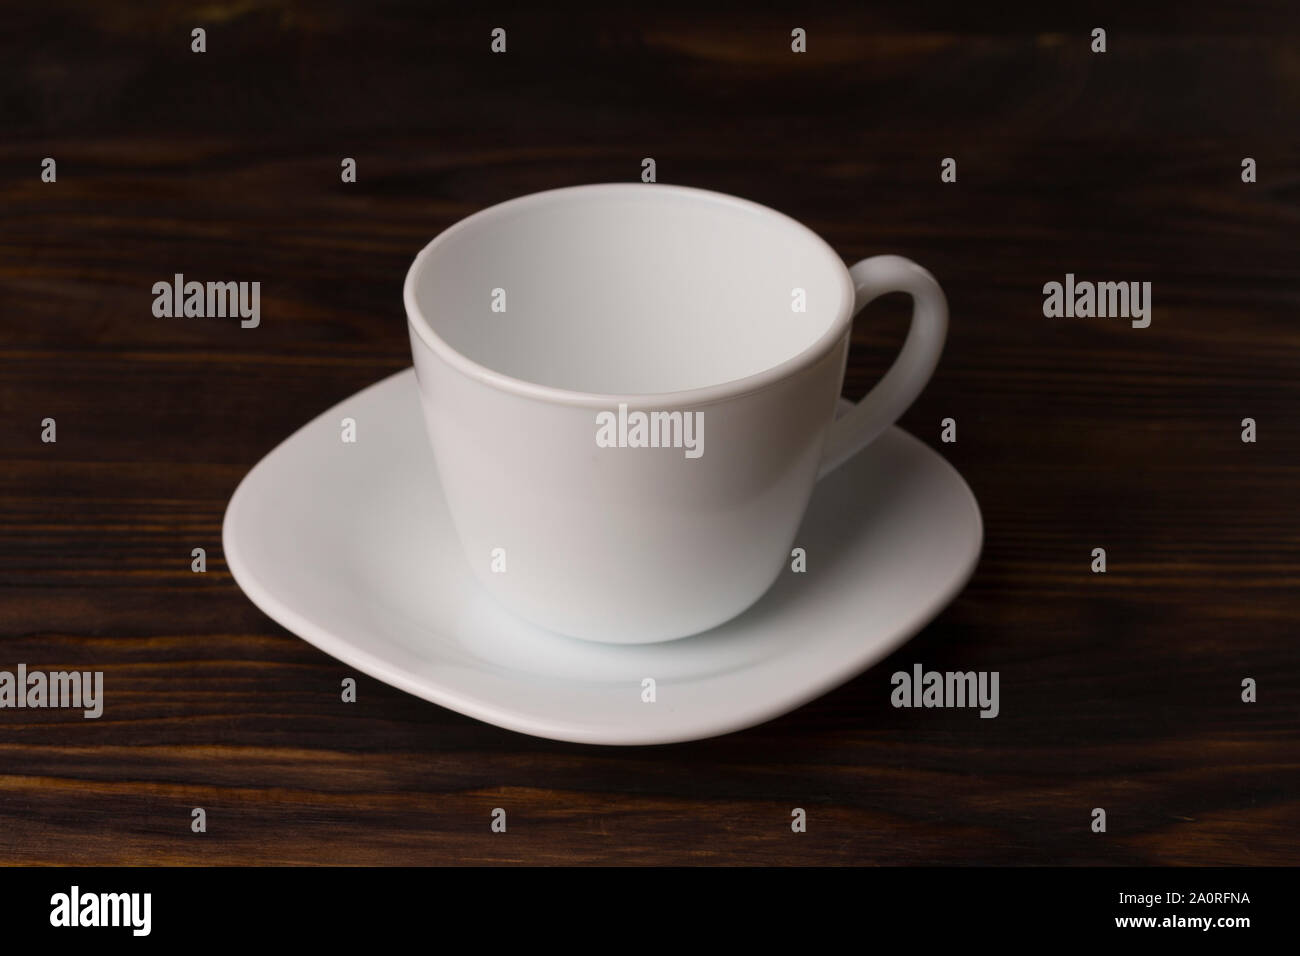 Empty white teacup and saucer on old wood texture background. Empty teacup and saucer set on wood plank table surface Stock Photo